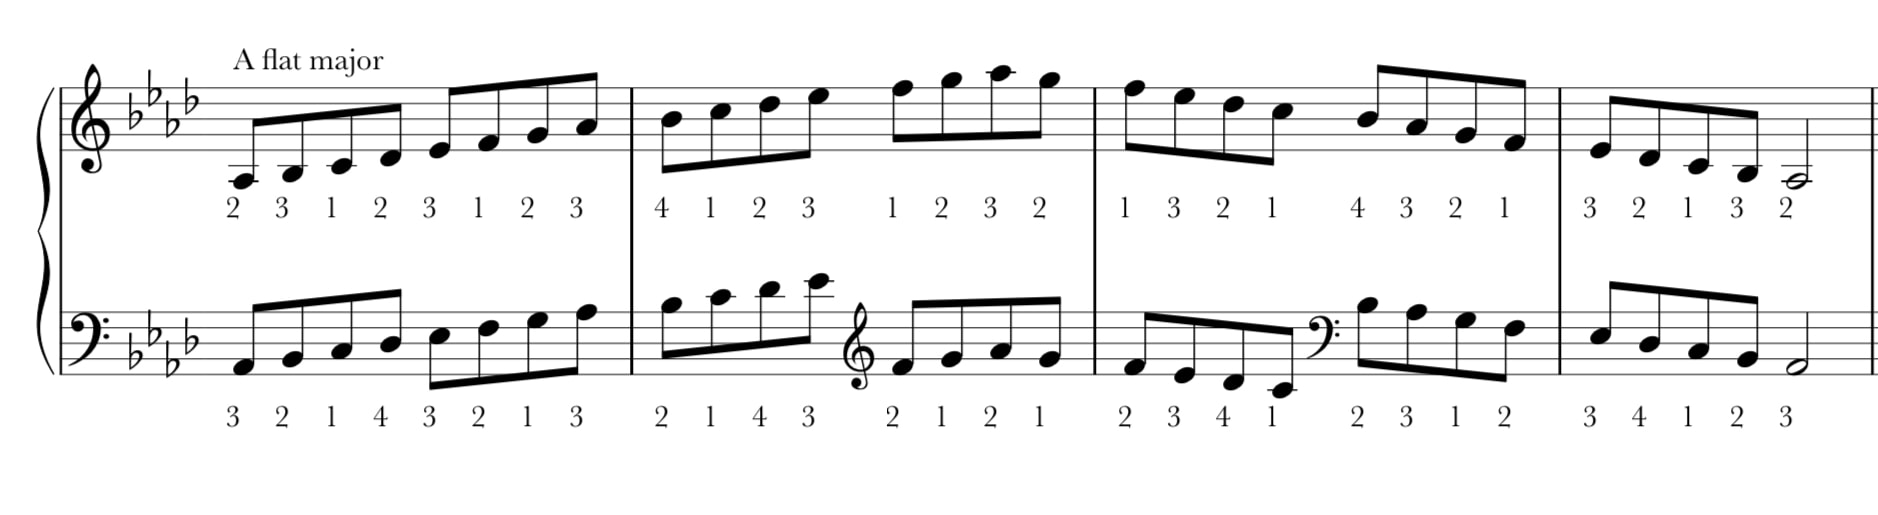 Notation for A flat major scale on piano, two octaves plus fingering